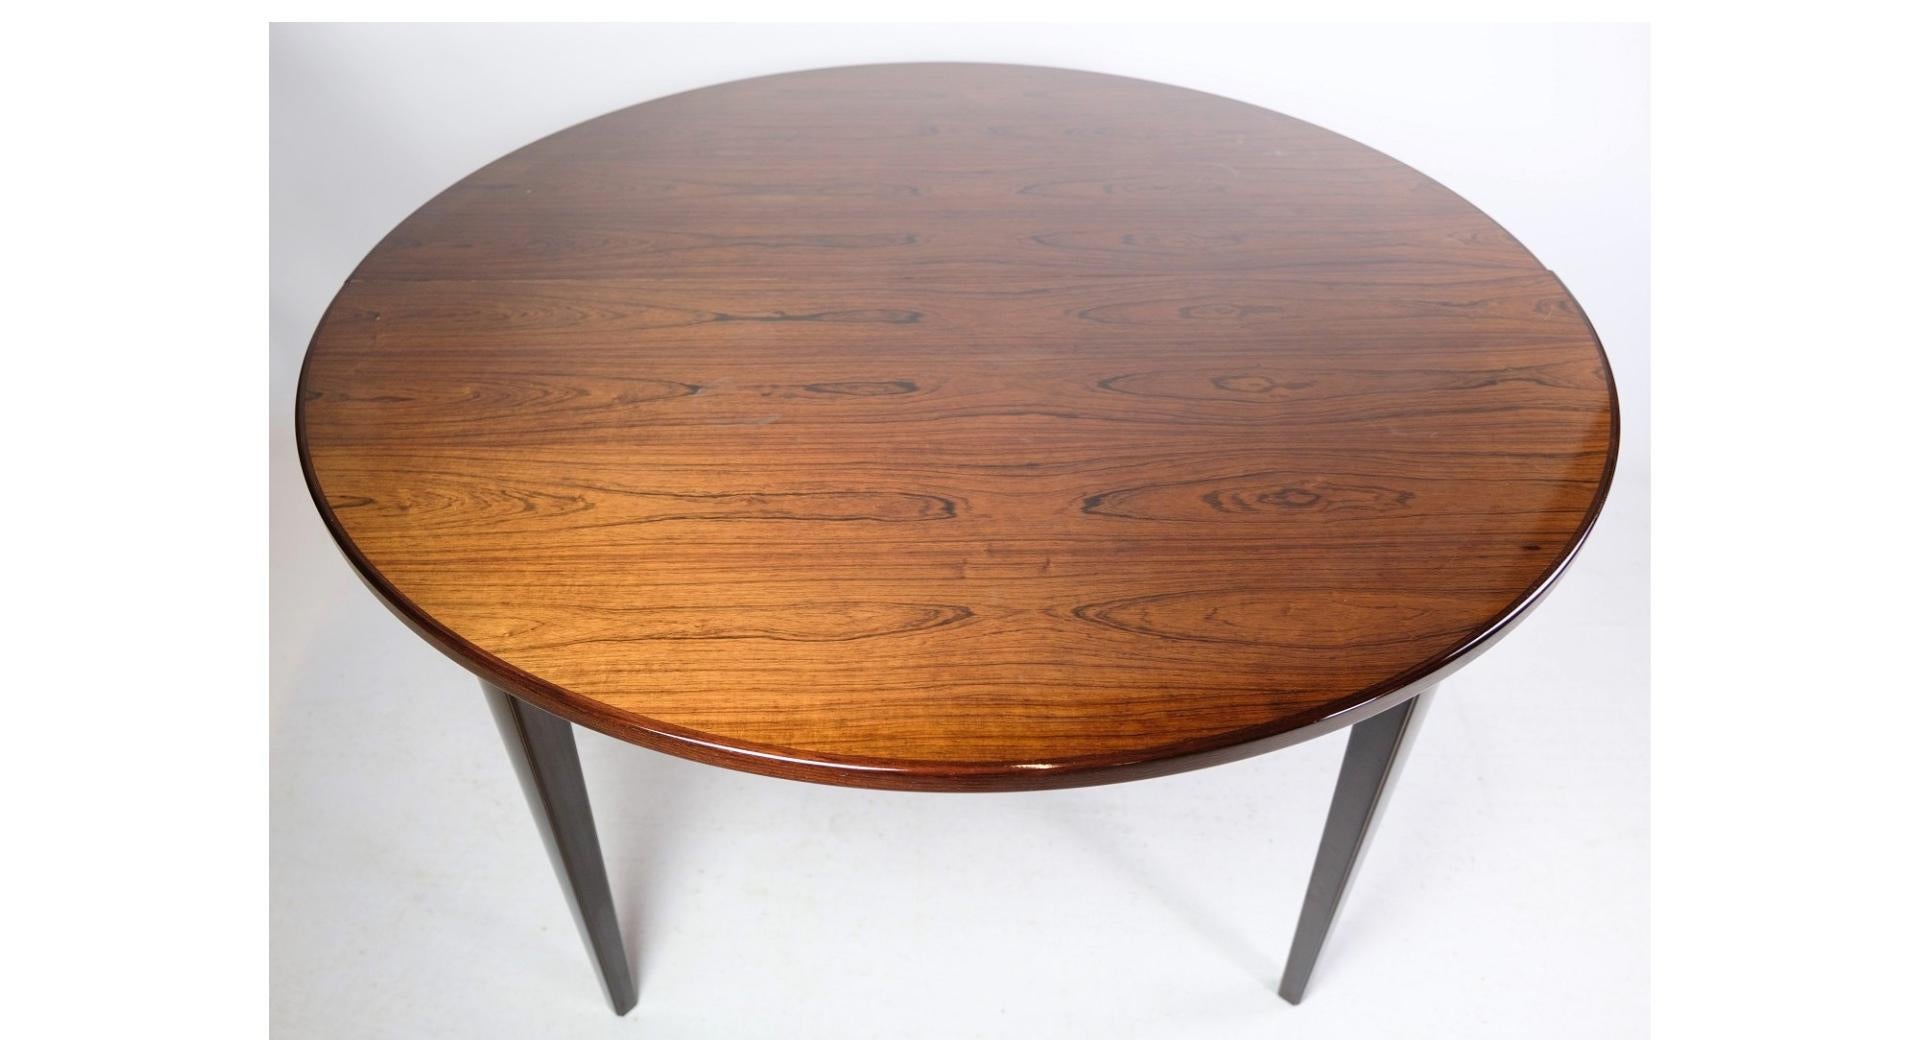 The dining table in rosewood, designed by Omann Jun. A/S, model no. 55 and from around the 1960s, represents a fine example of mid-20th century Danish furniture design.

Oman Jun. A/S was known for their quality furniture, and the model no. 55